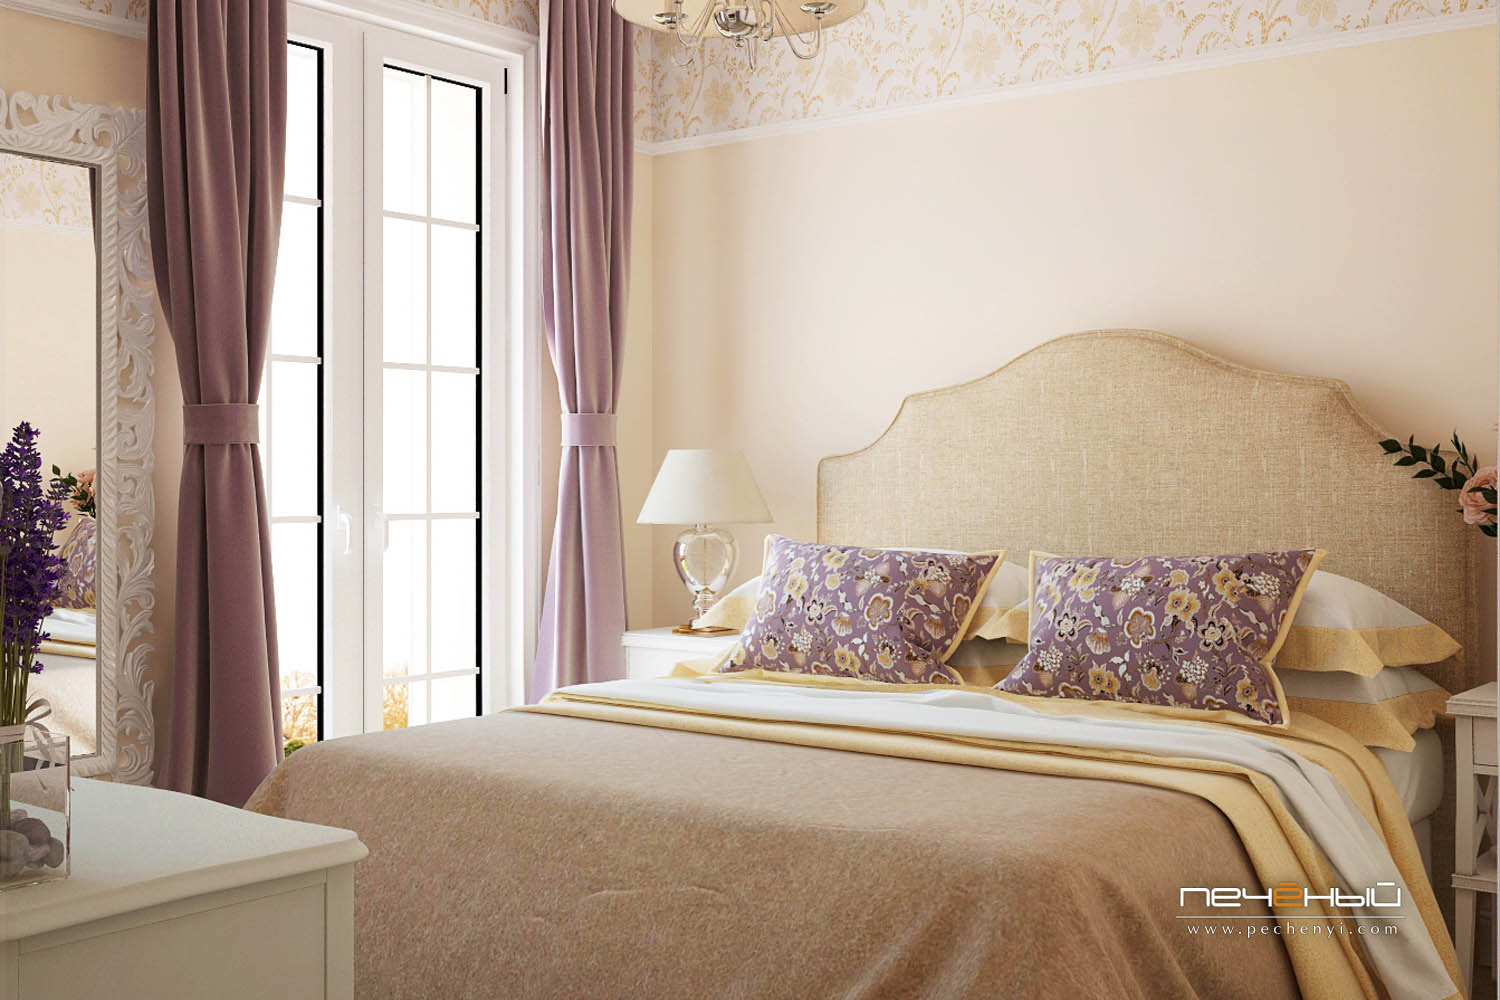 The master bedroom is done in buttermilk and purple, textiles make the room very cozy and eye catchy